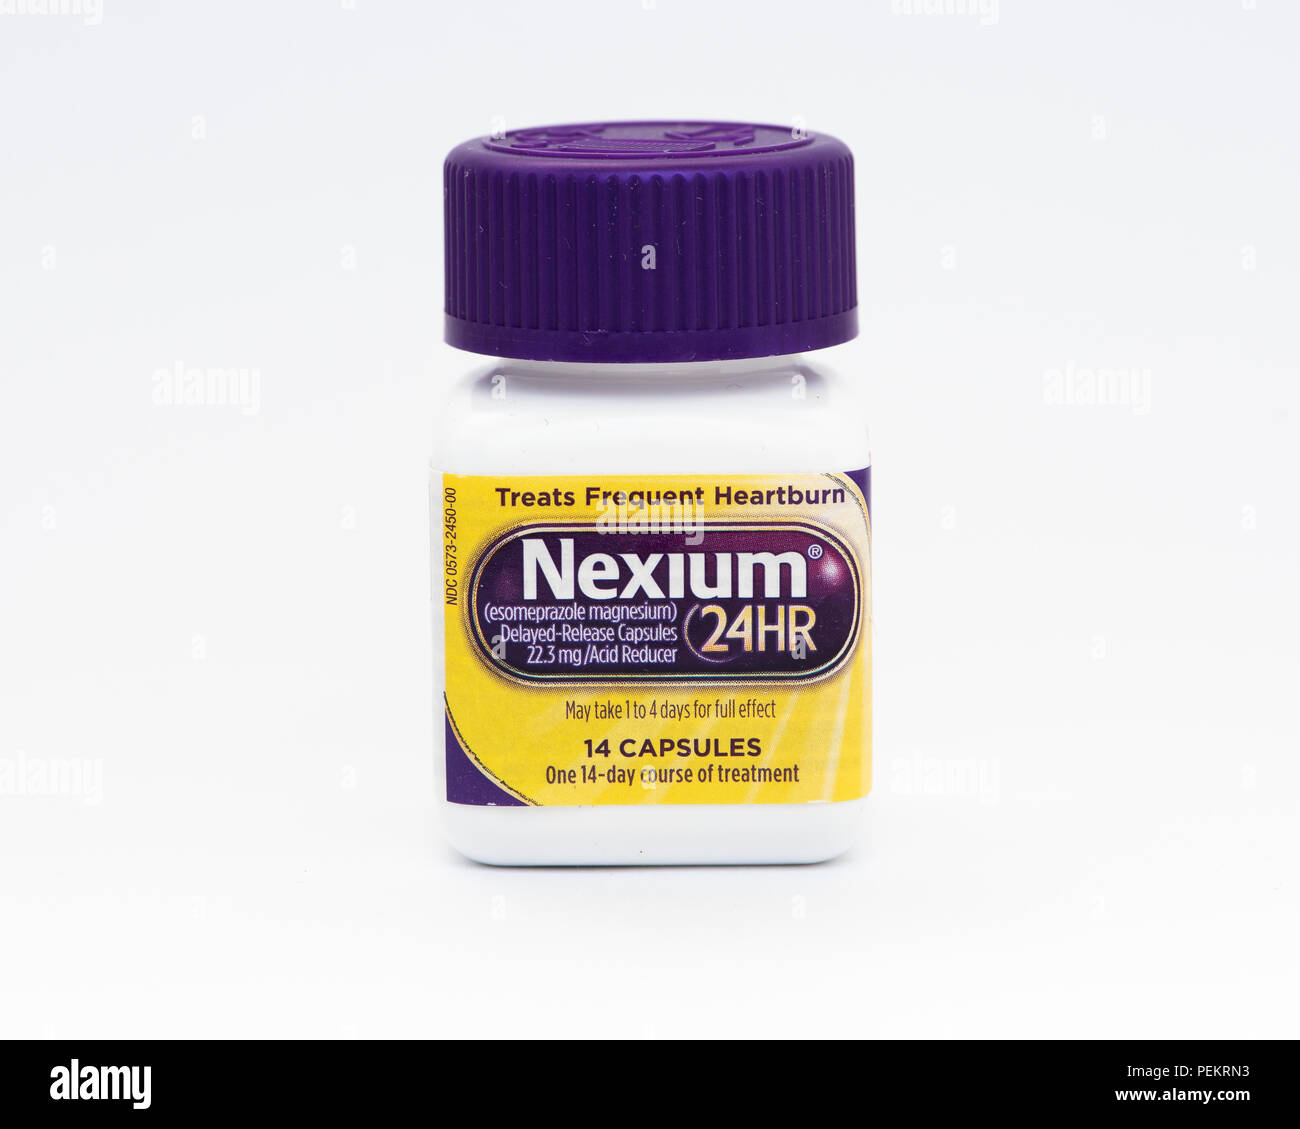 A white plastic bottle containing 14 capsules, 22.3 mg of Nexium for the treatment of frequent heartburn. Stock Photo